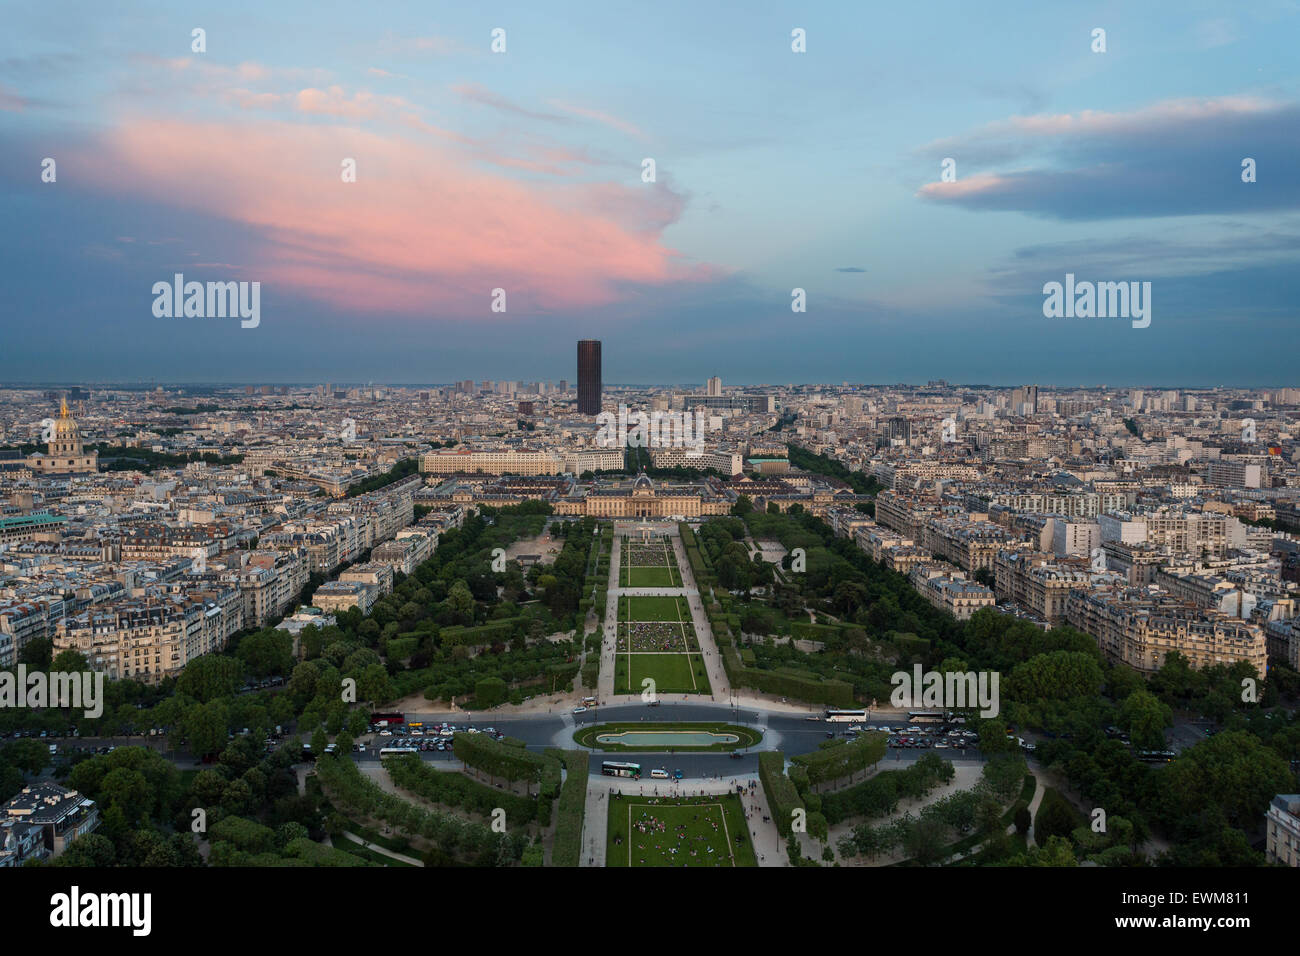 A view of the Champ de Mars from the Eiffel Tower in Paris. Stock Photo